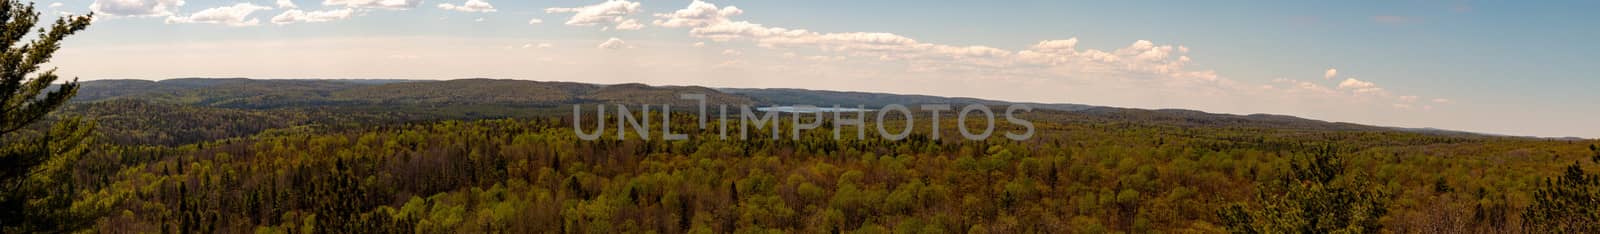 Panorama photo of lookout trail in algonquin park. It is a short uphill hike to get a view of the entire park. by mynewturtle1